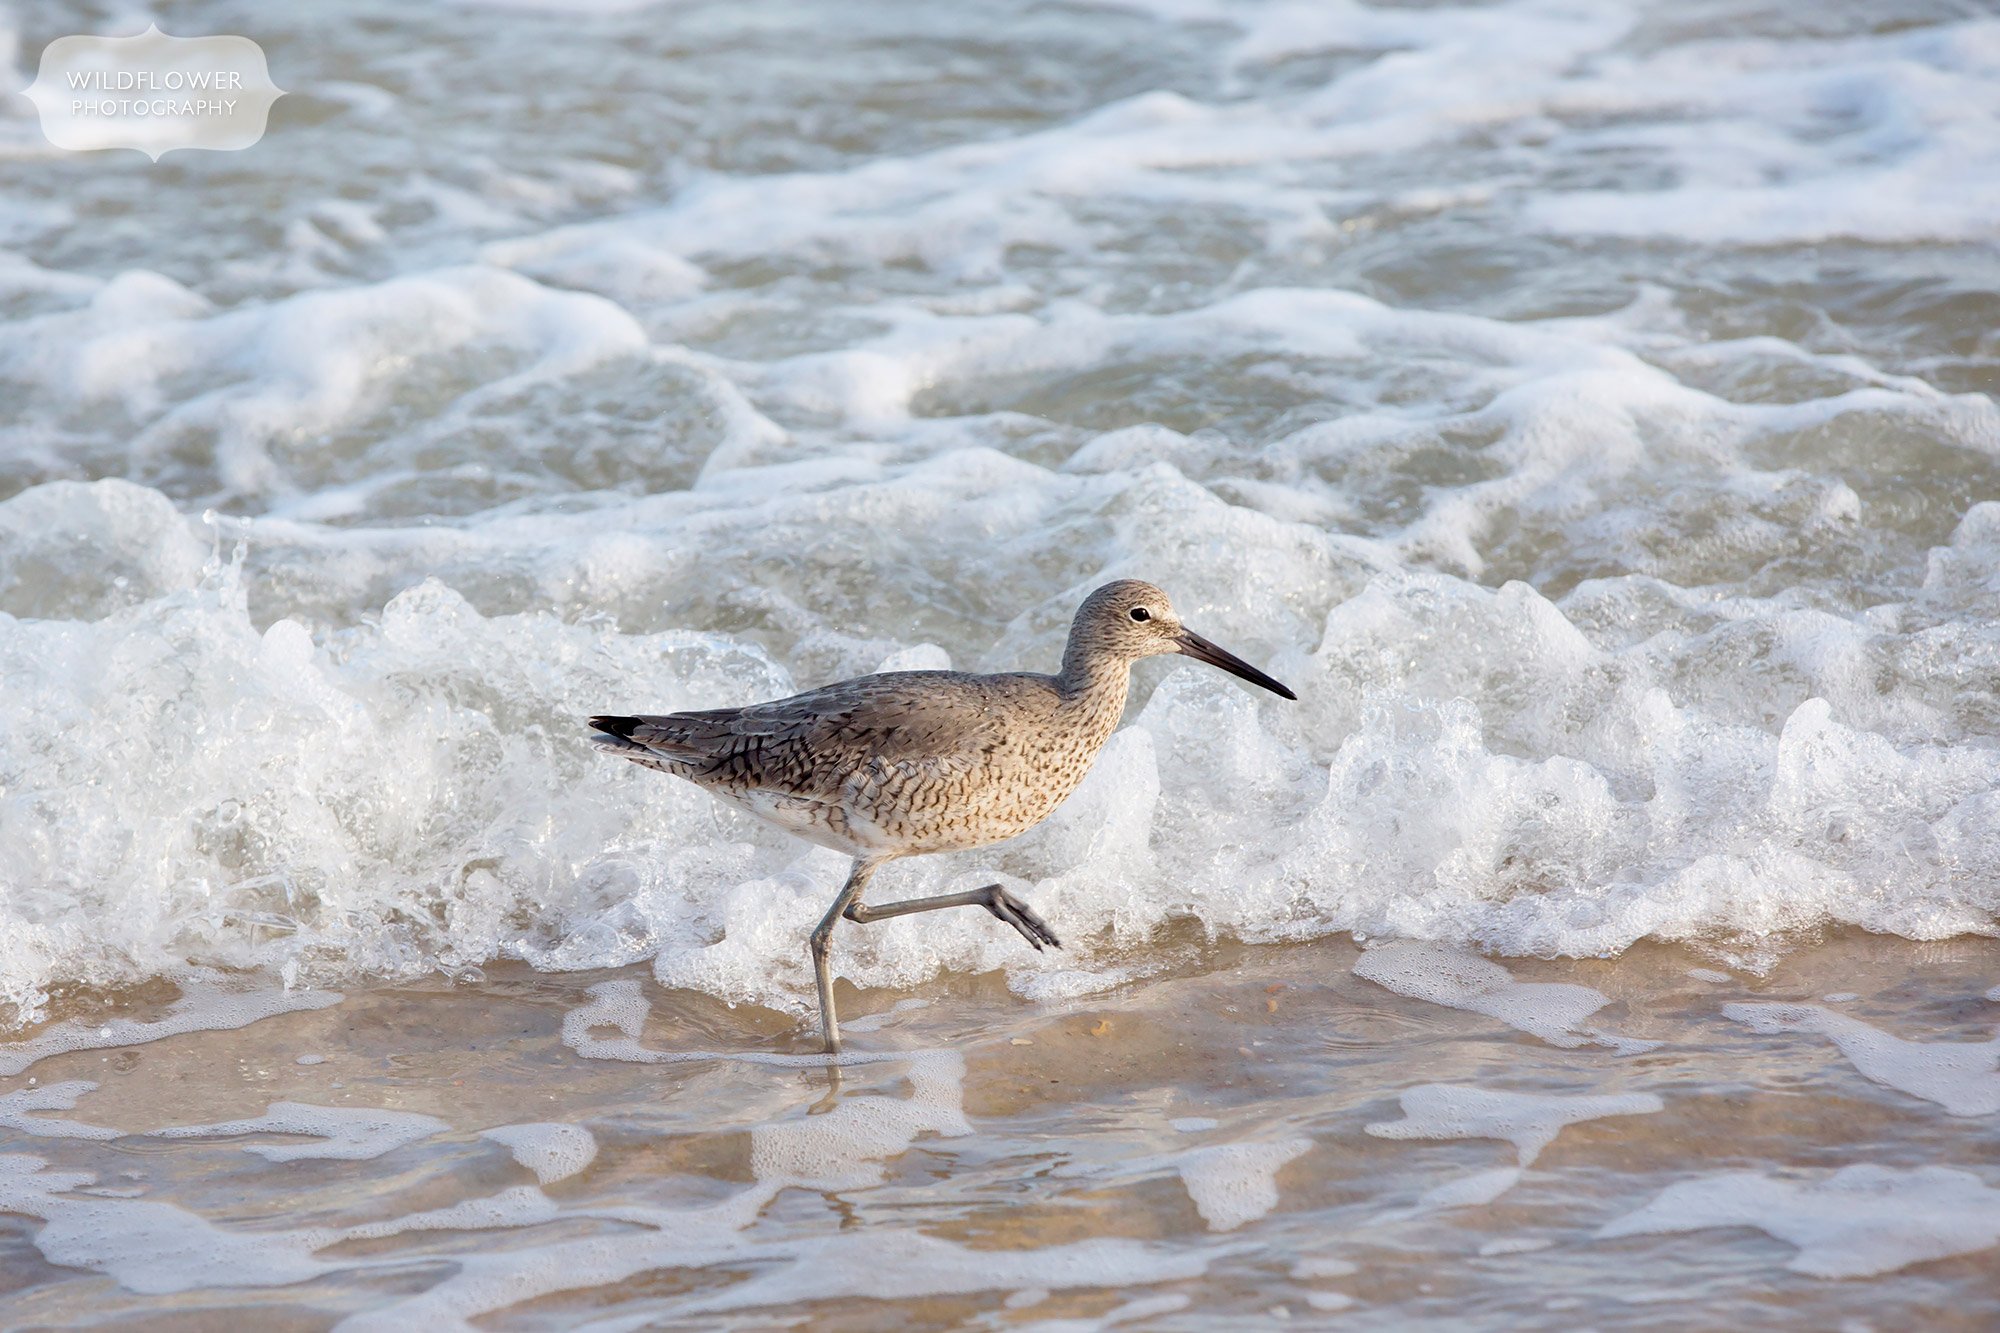 The Willet shorebird walks along the surf at St. George Island in Eastopint, FL.